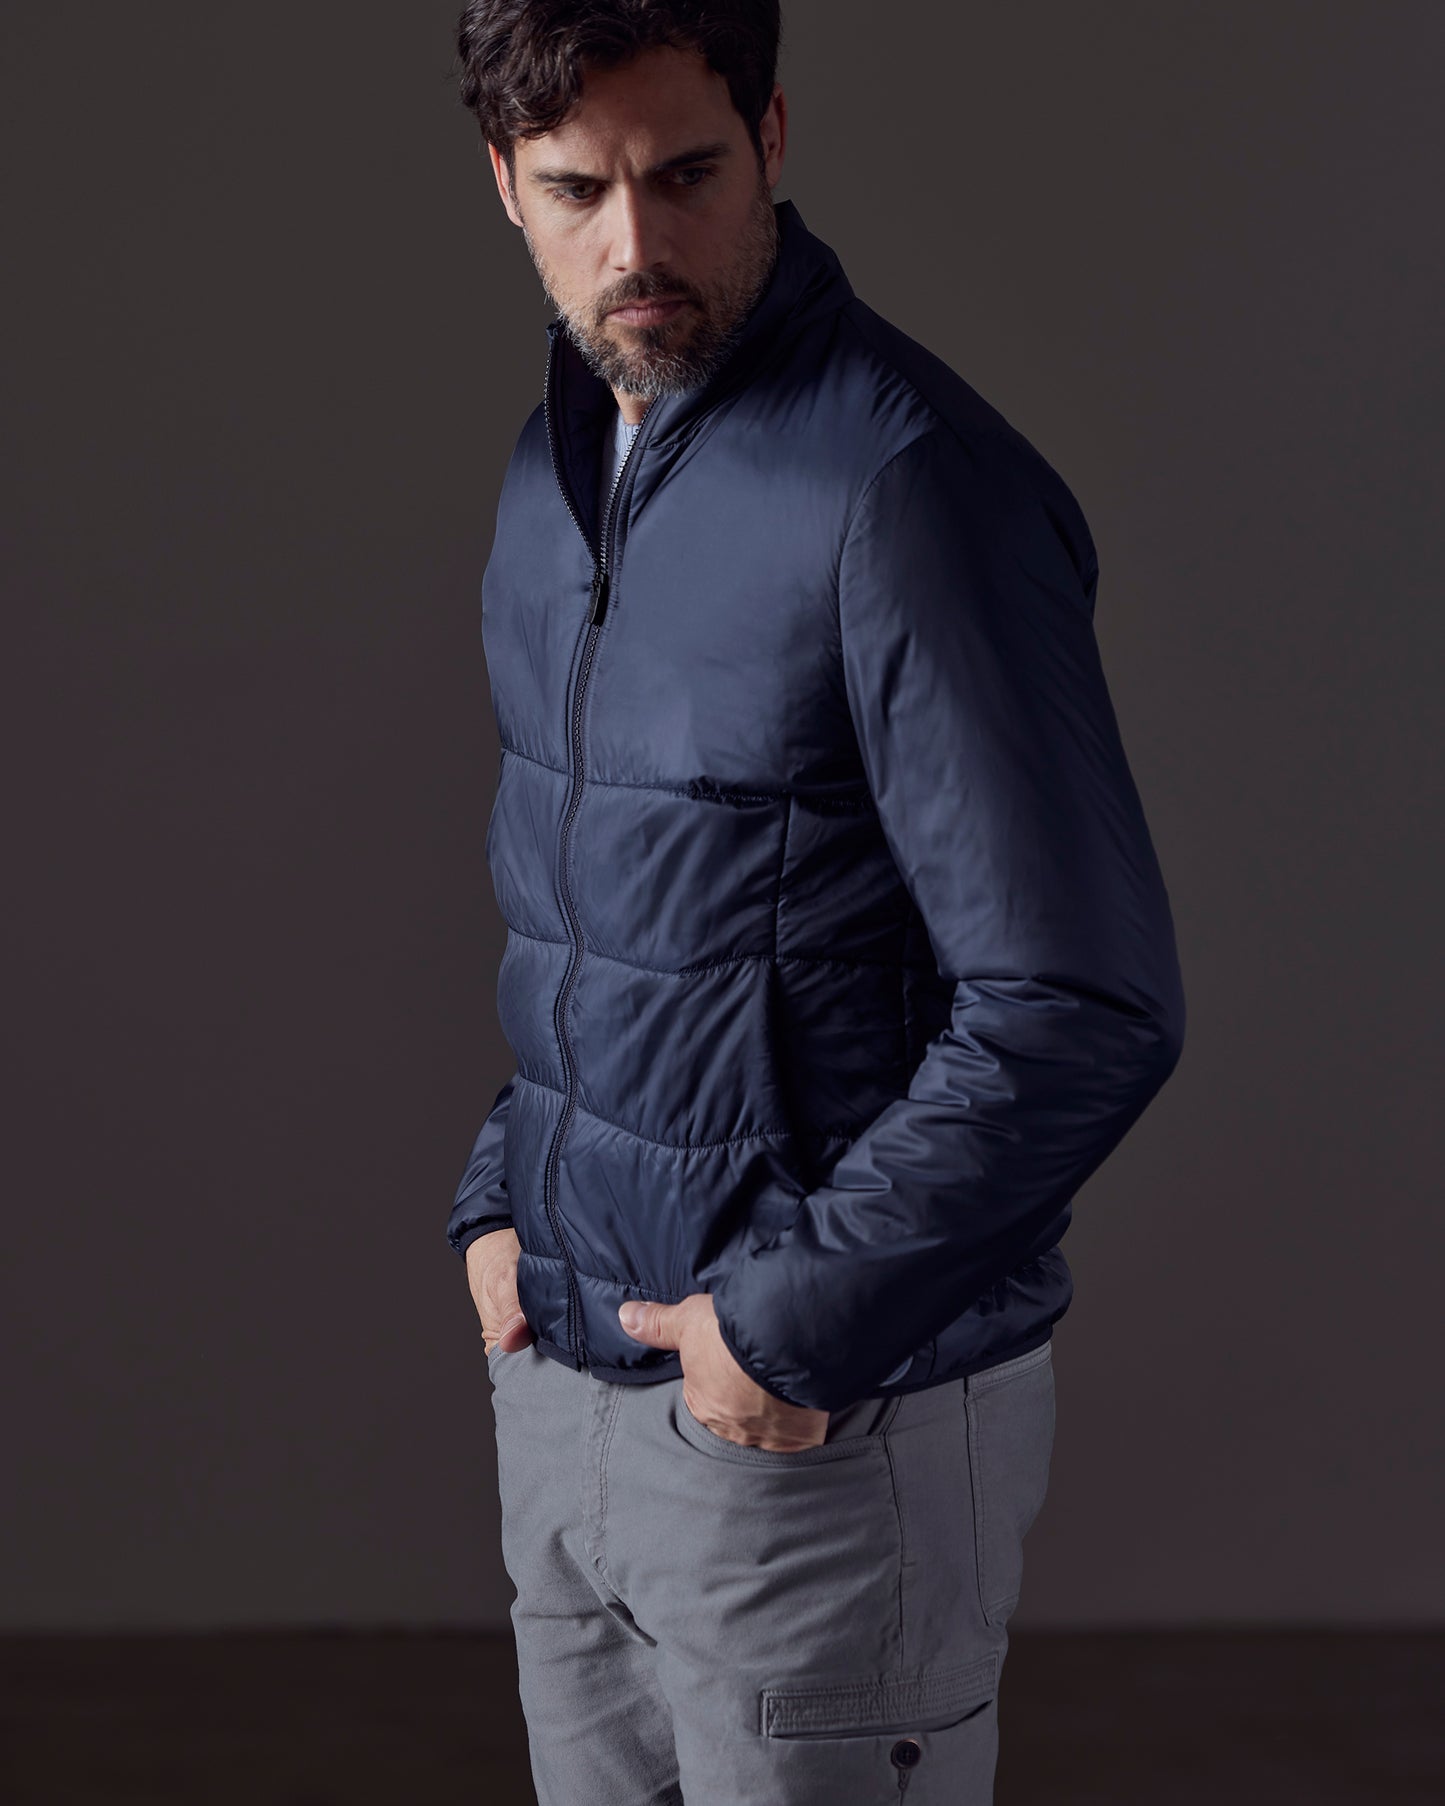 Man wearing blue Eco Insulated Jacket from AETHER Apparel